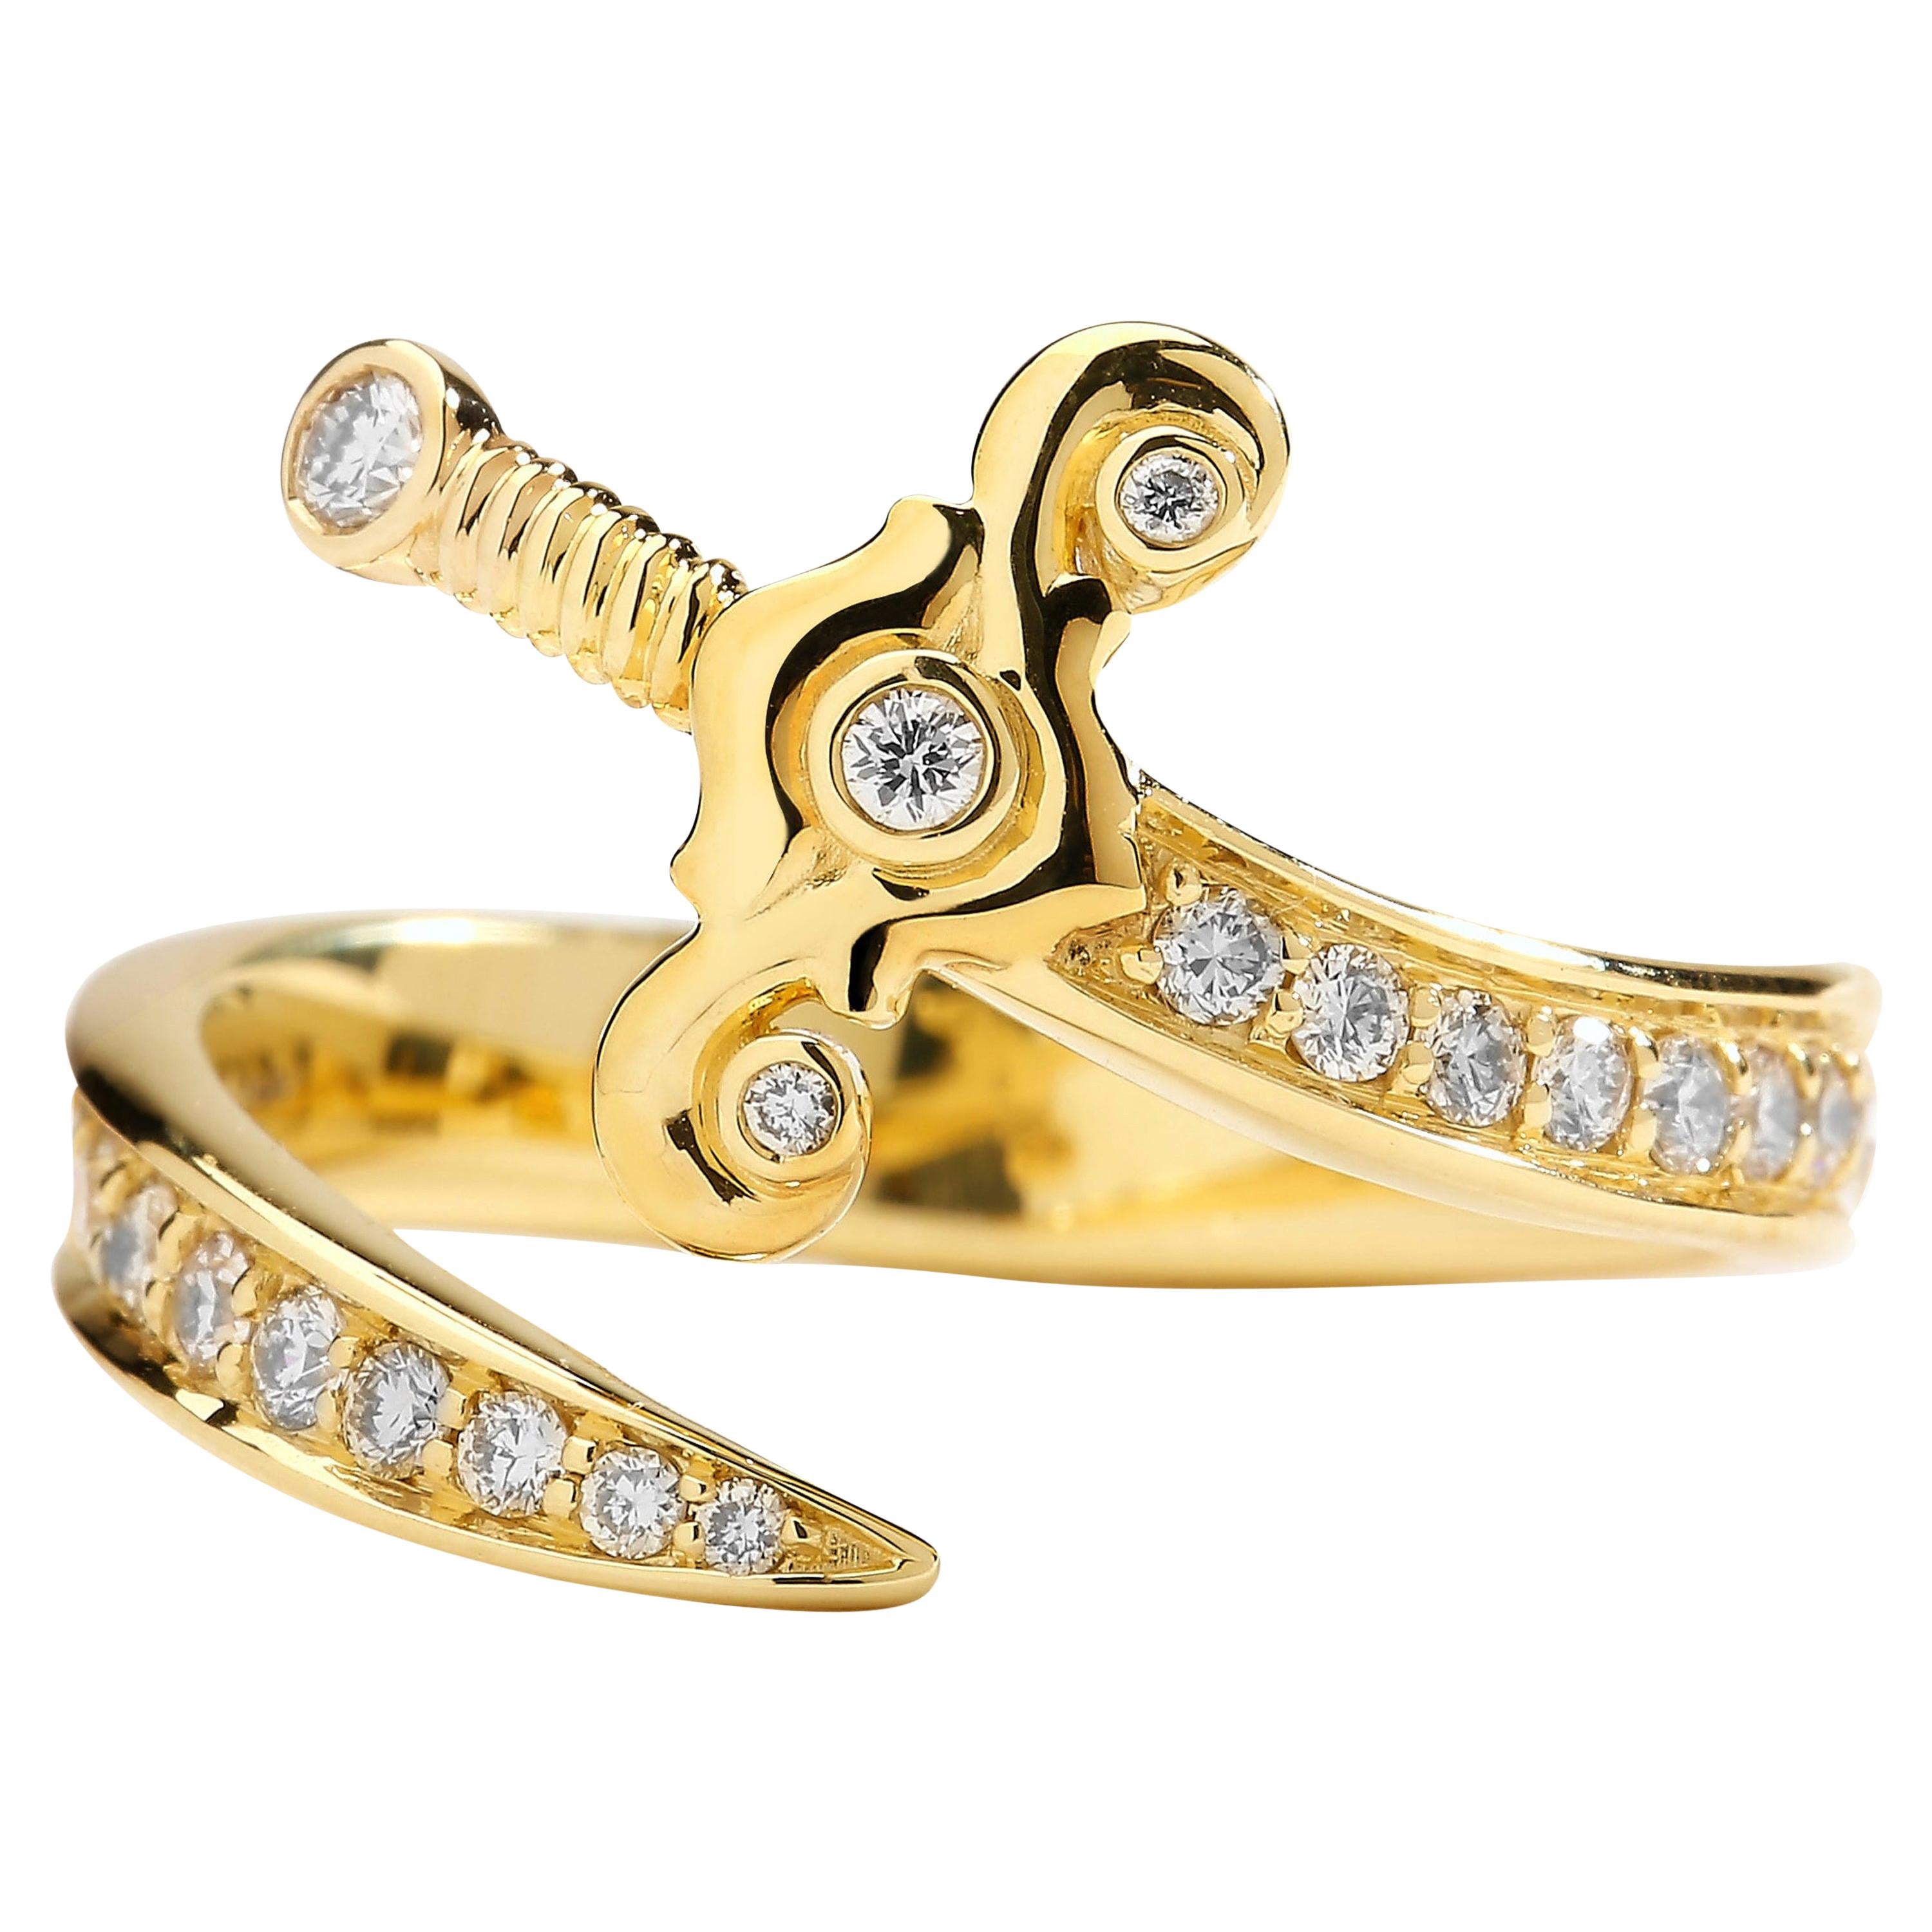 Syna Yellow Gold Sword Ring with Bright Diamonds